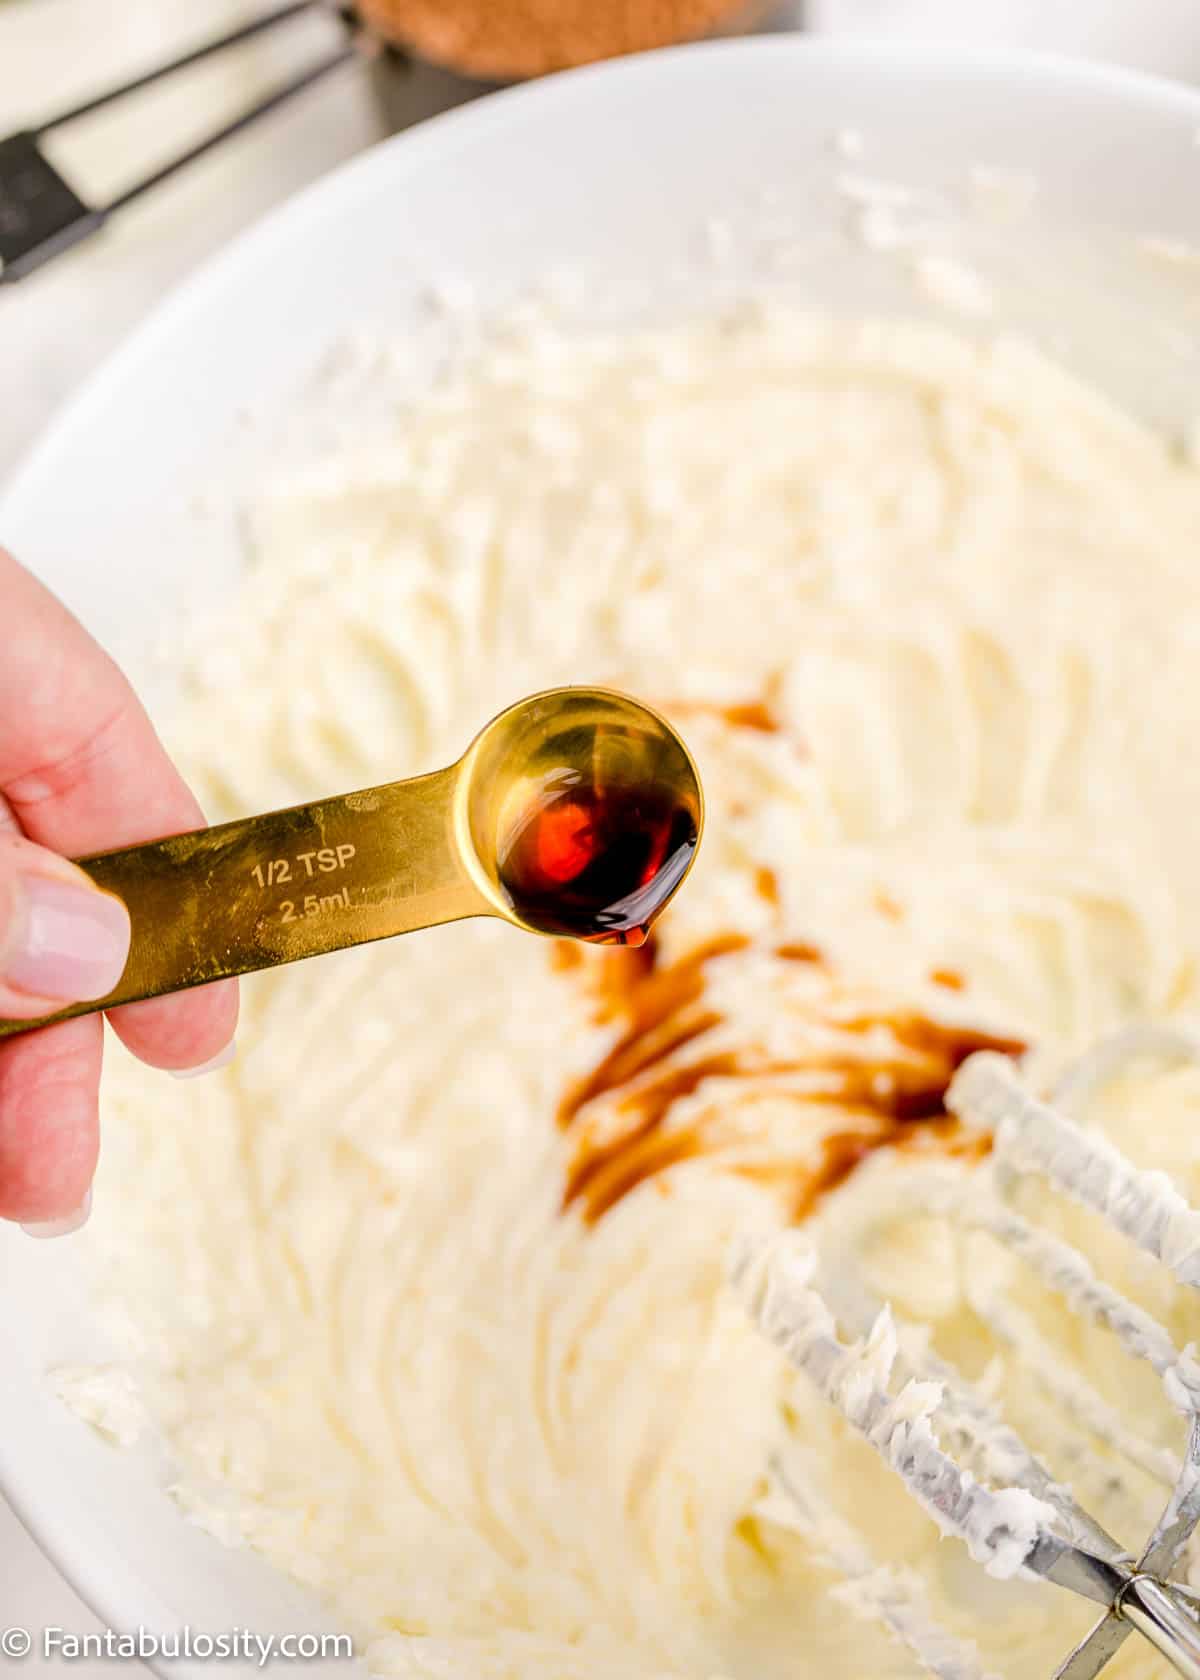 Pour in the vanilla to the butter mixture